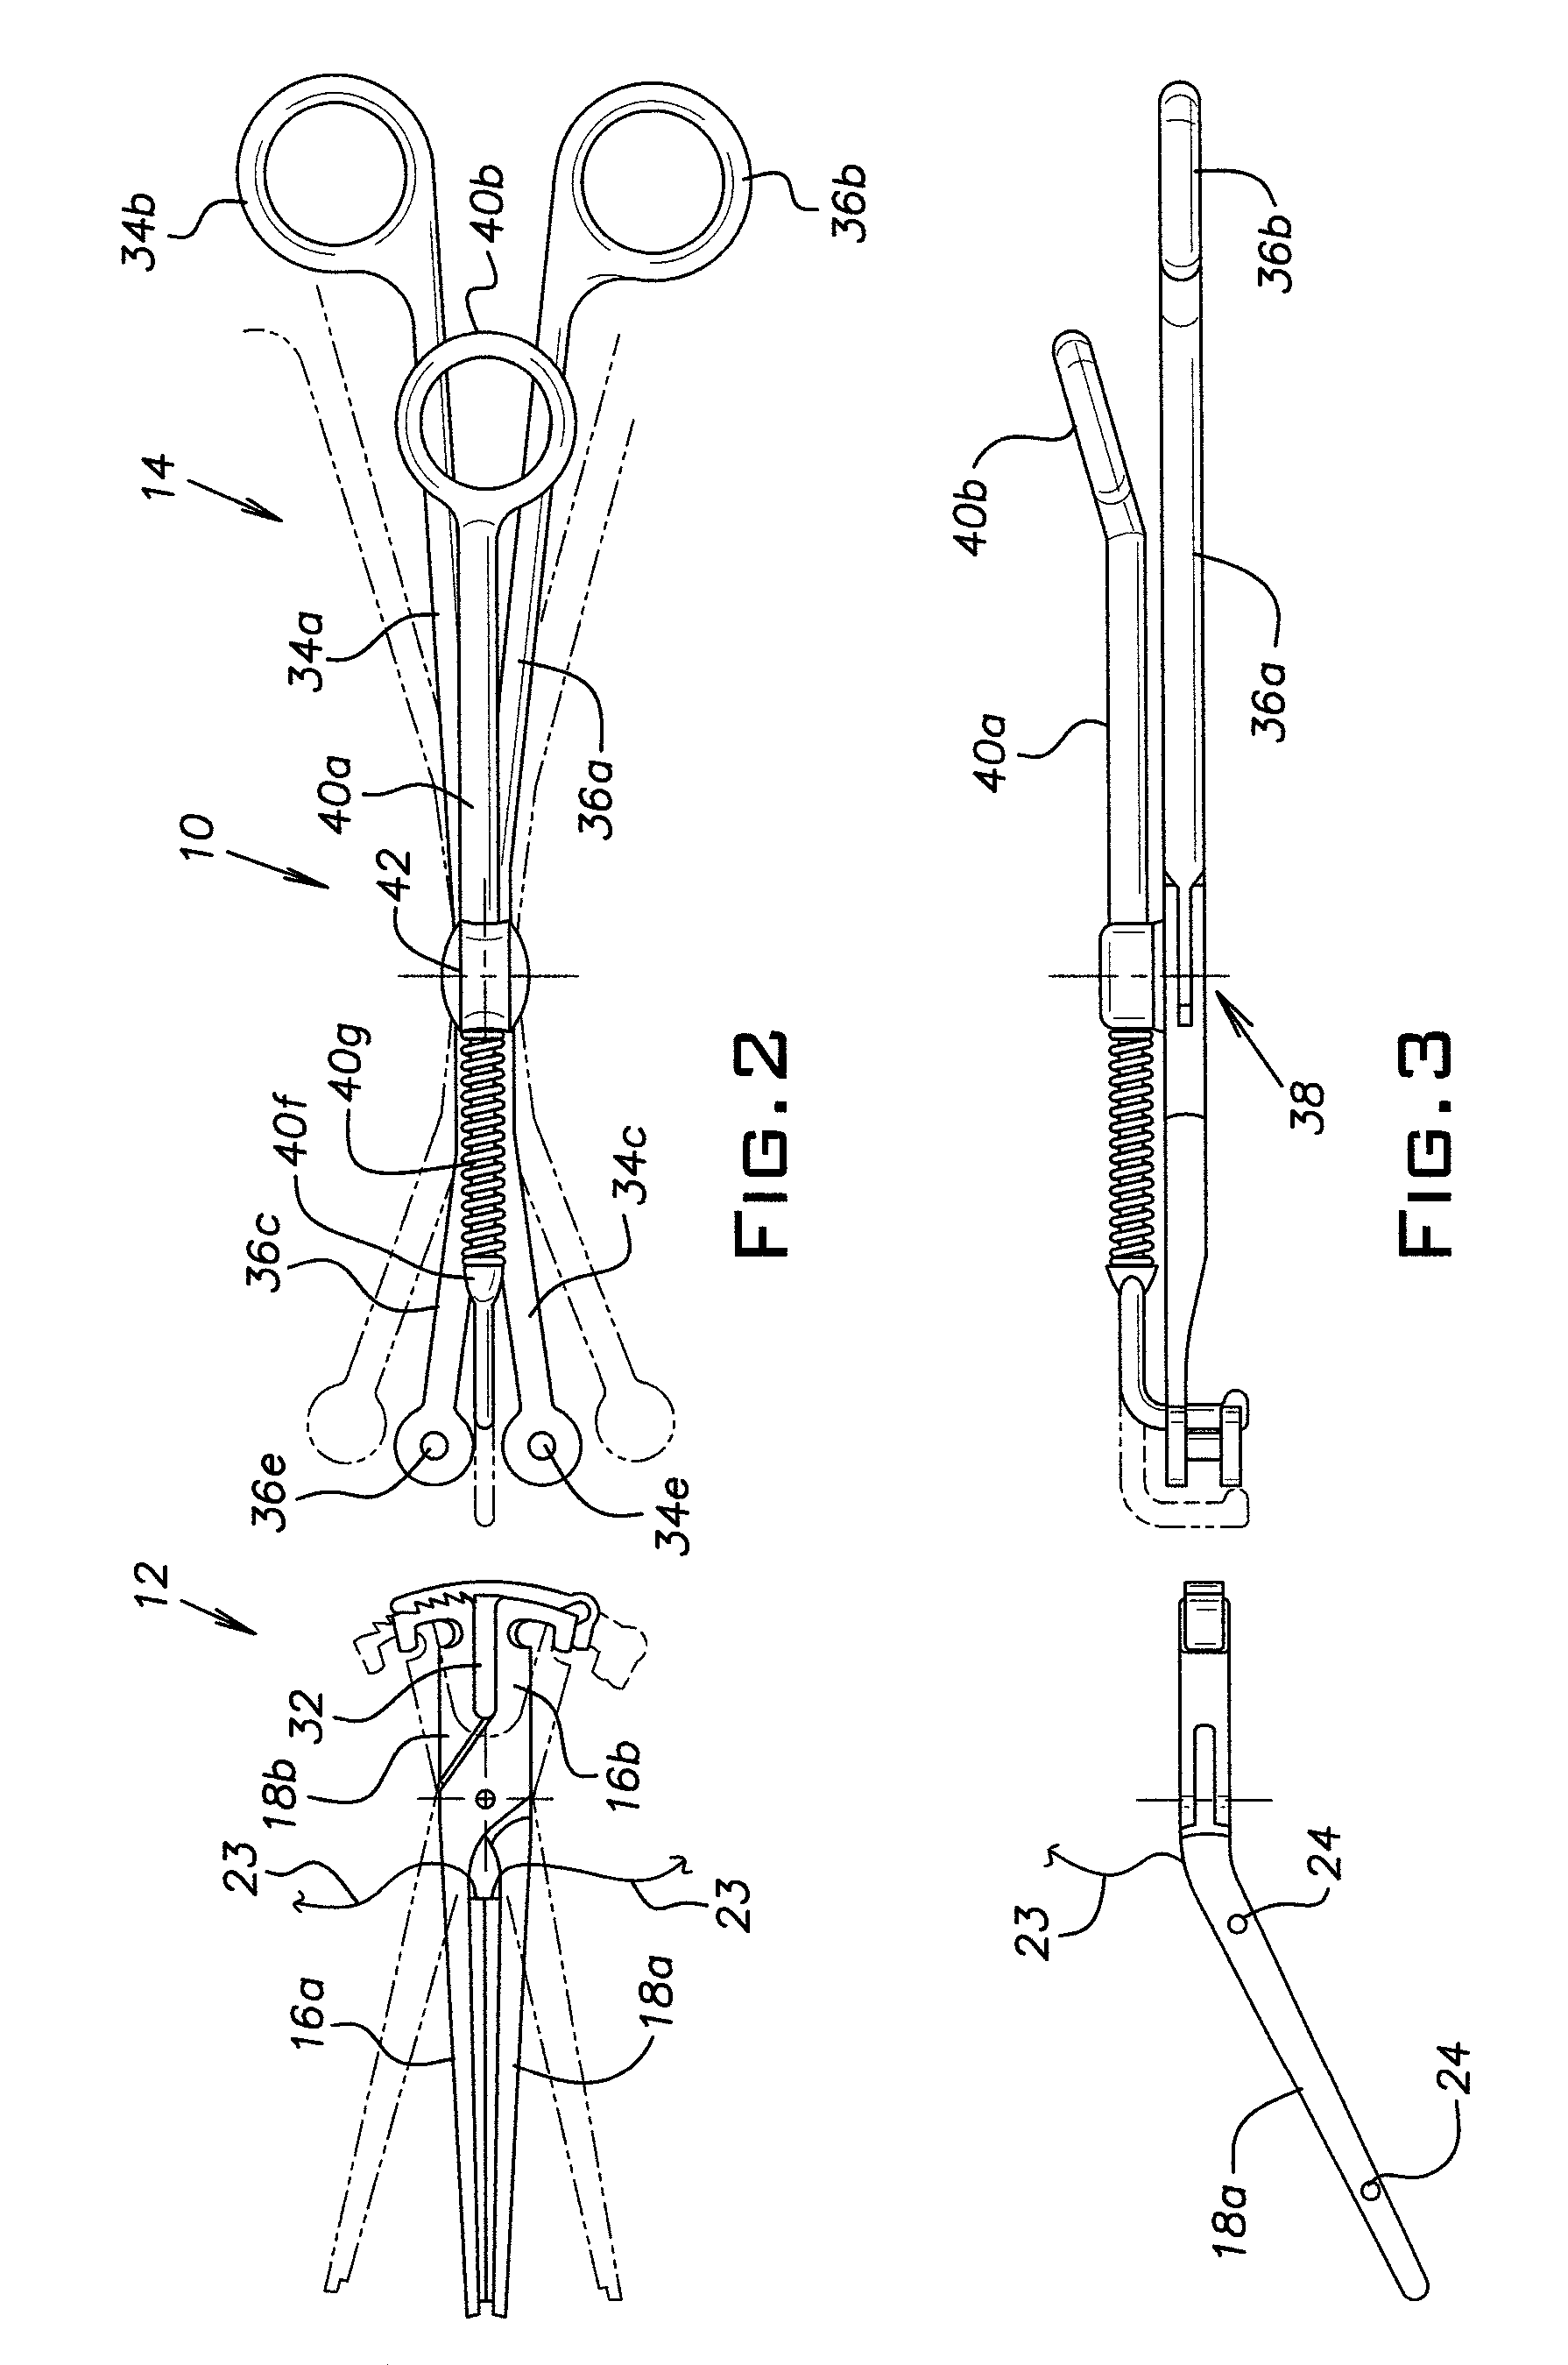 Surgical clamp assembly with electrodes